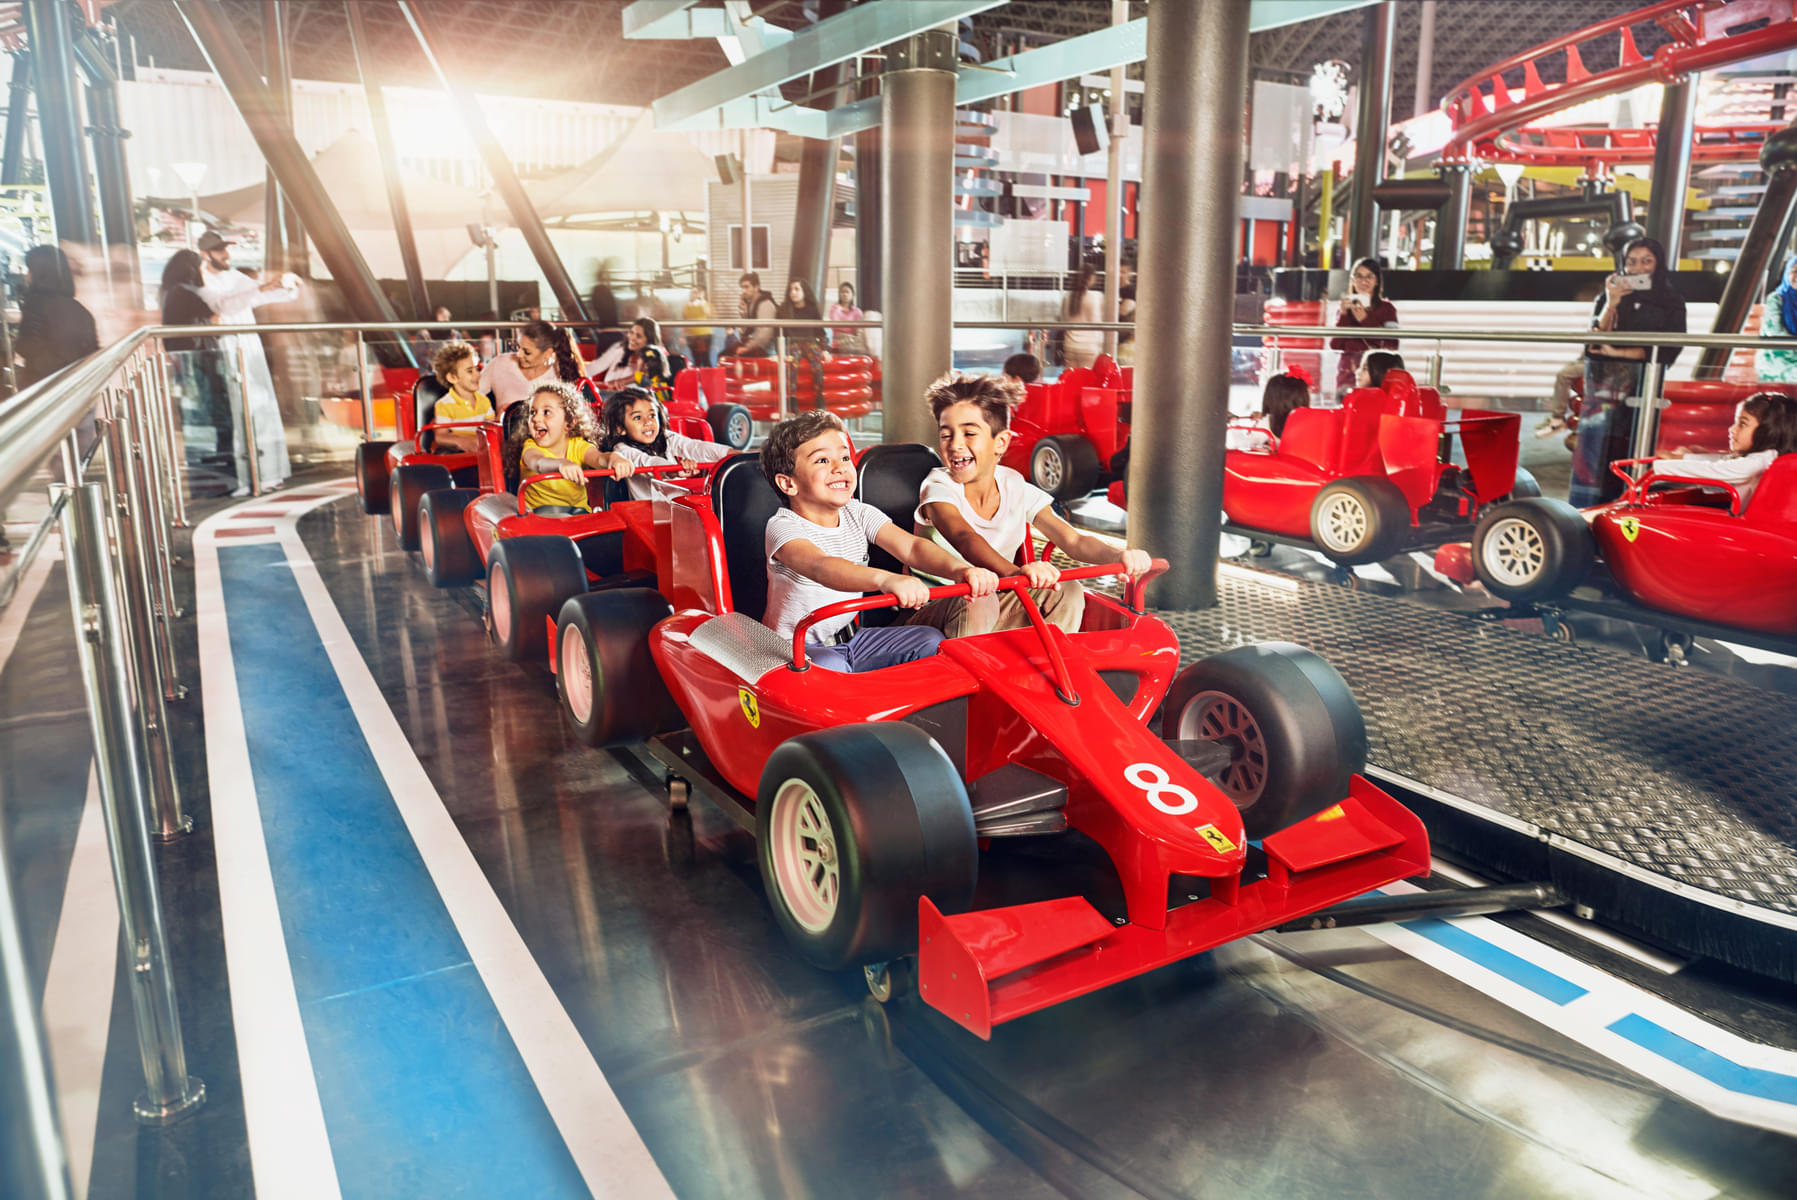 Enjoy a thrilling ride on the Speedway Race